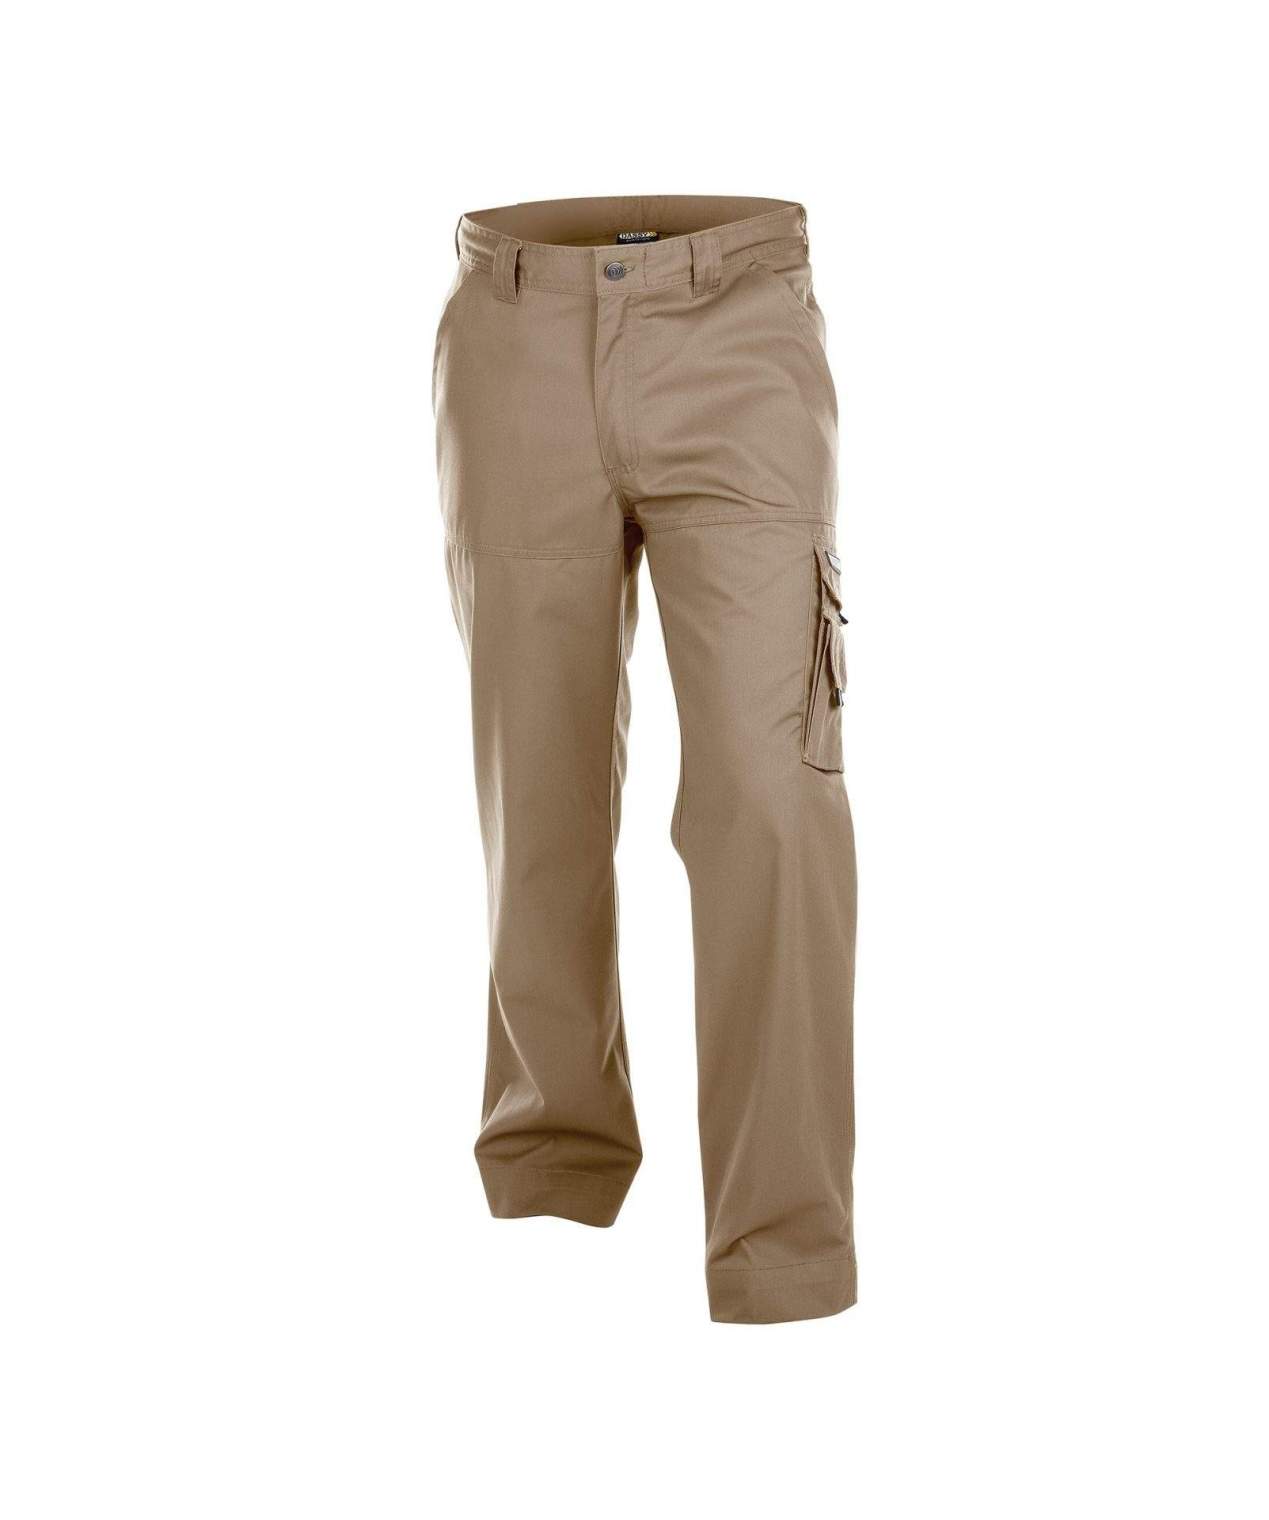 liverpool work trousers beige front